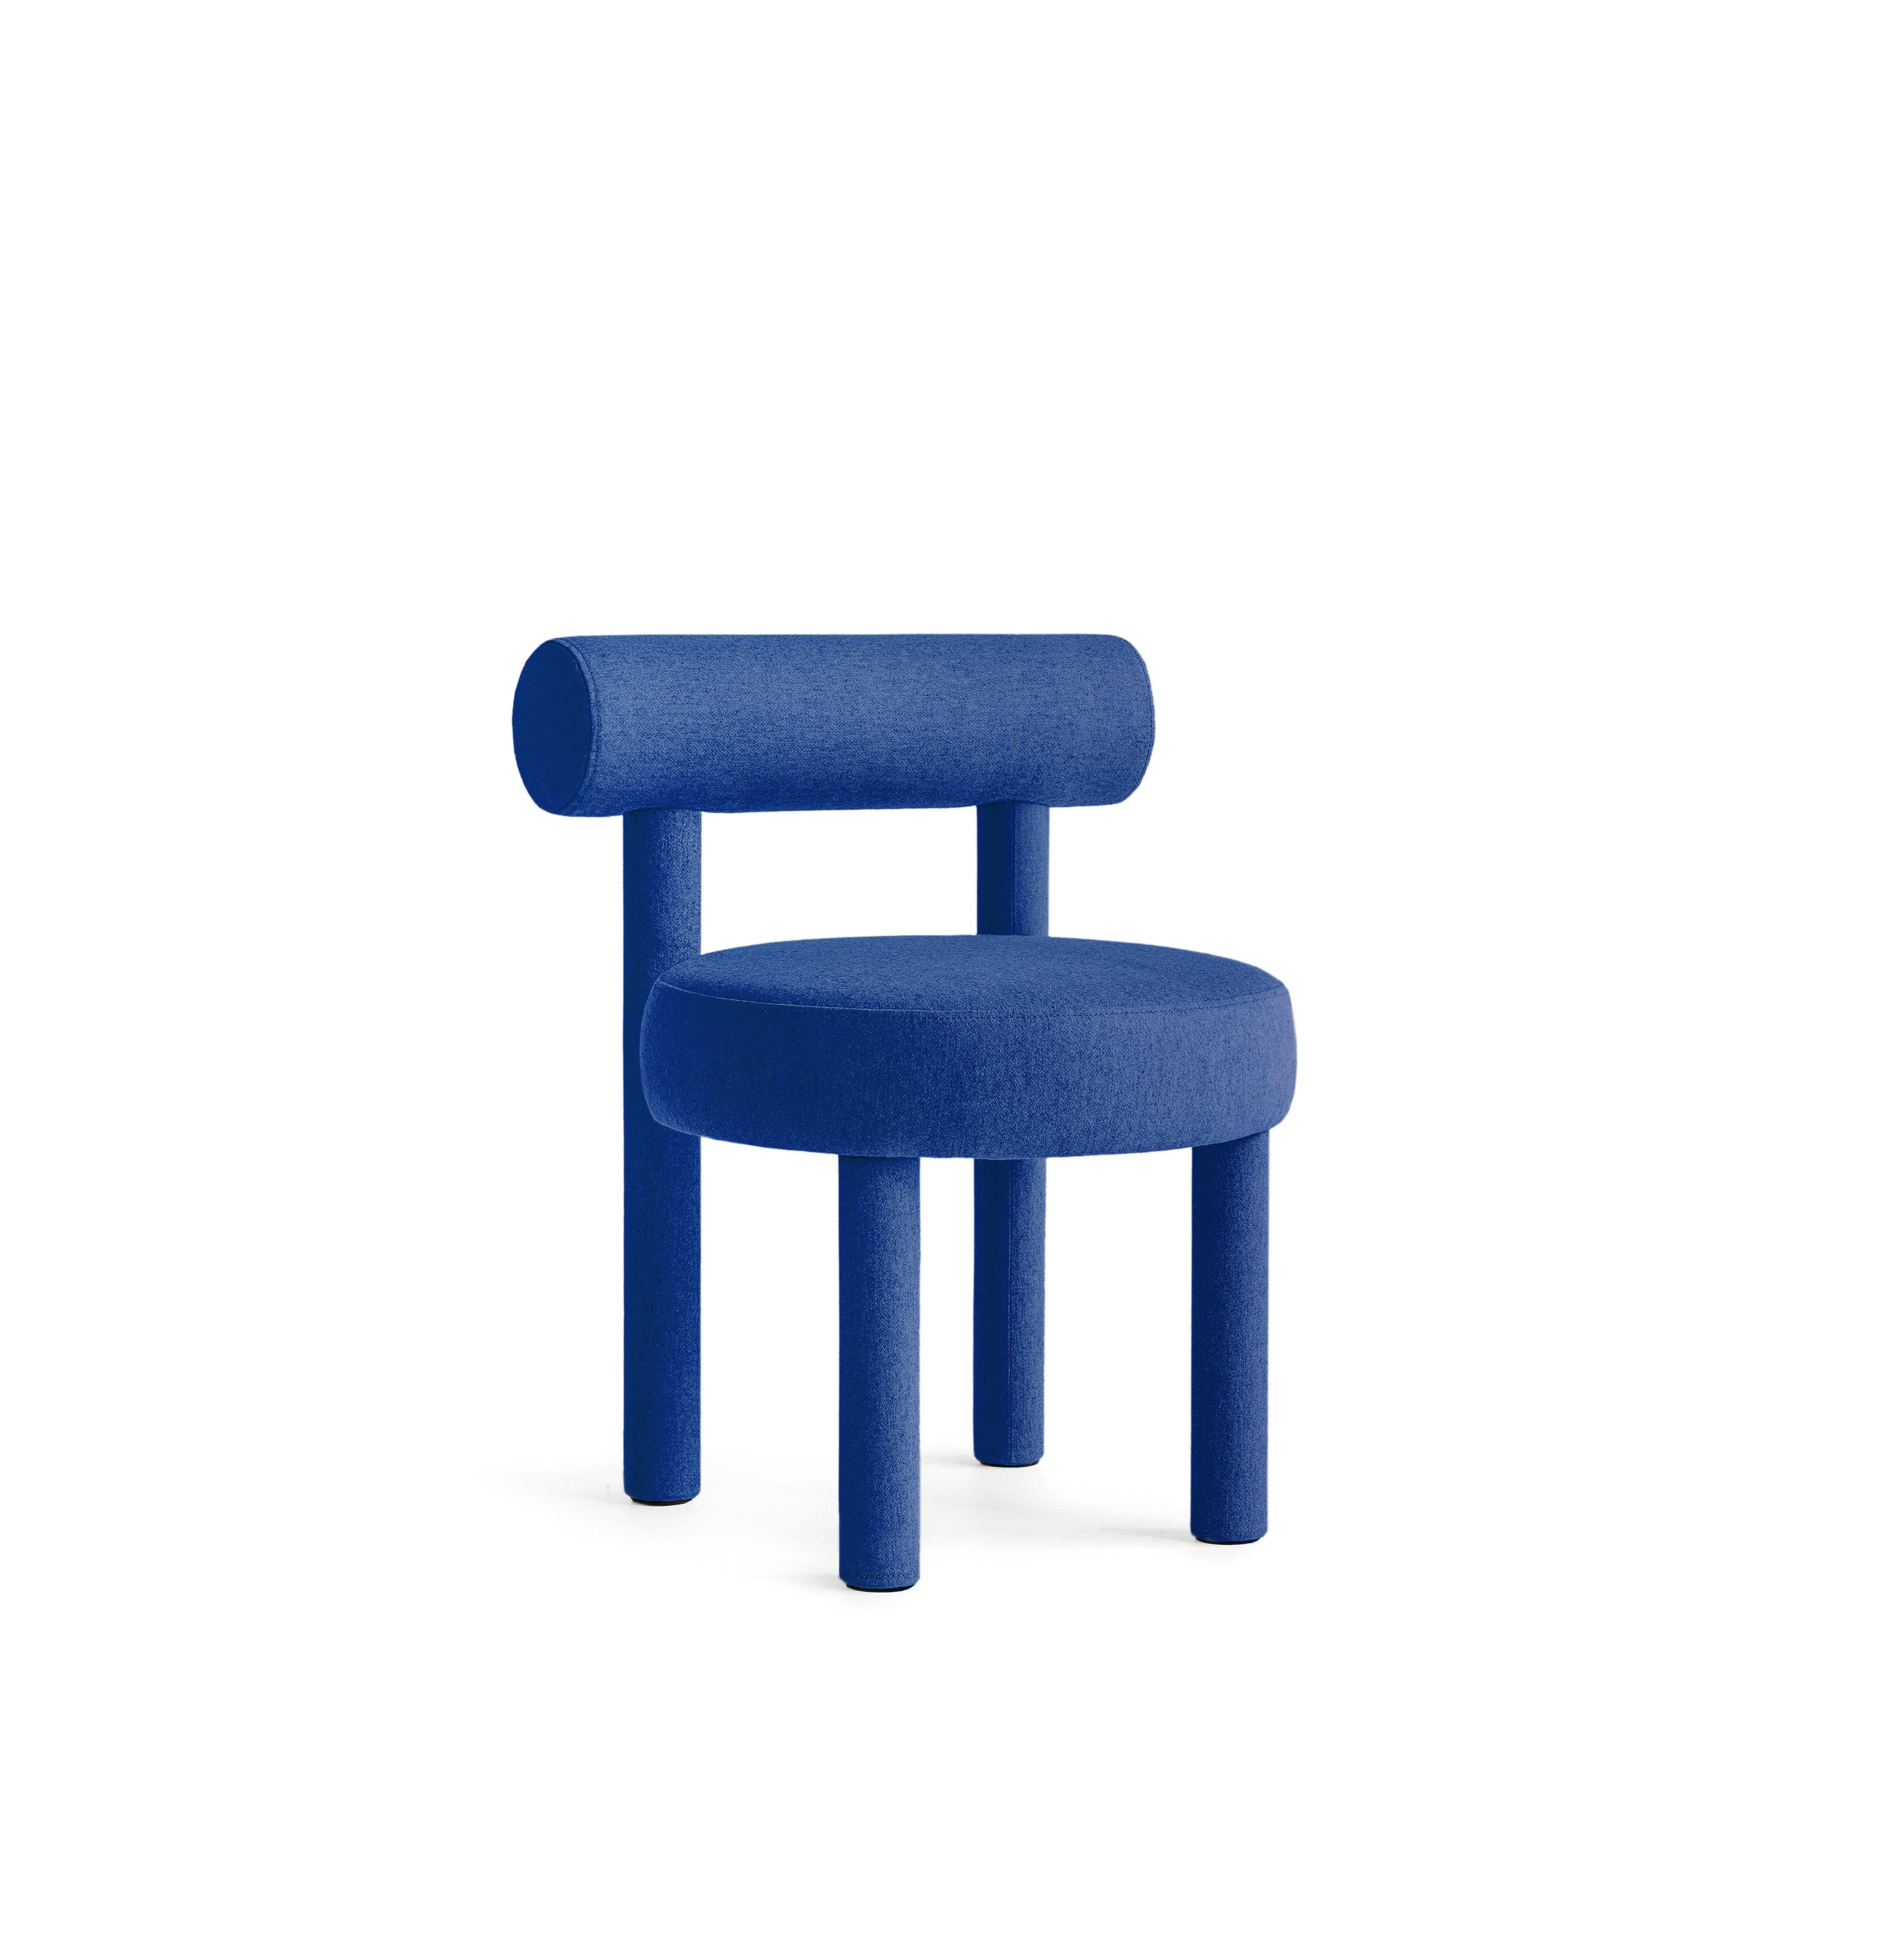 Chair Gropius CS1
Designer: Kateryna Sokolova

Model in the main picture Savoy Fr Cobalt

Dimensions:
Height: 74 cm / 29,13 in
Width: 57 cm / 22,44 in
Depth: 57 cm / 22,44 in
Seat height: 47 cm / 18,11 in

New NOOM furniture collection is dedicated